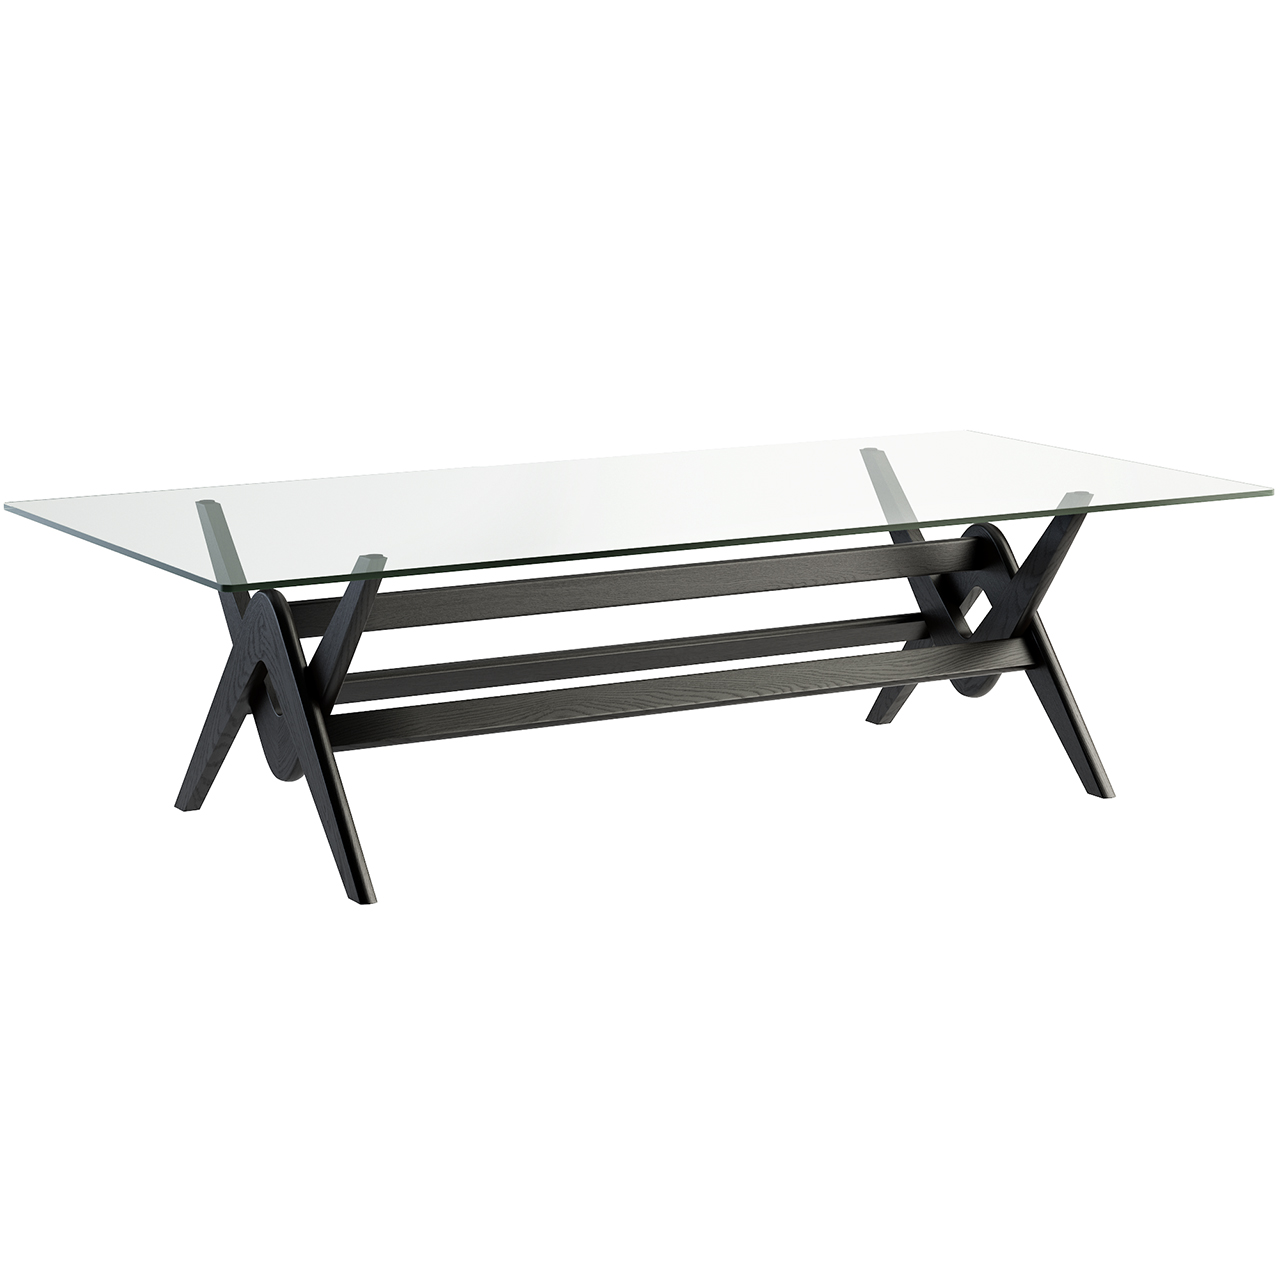 056 Capitol Complex Table by Cassina